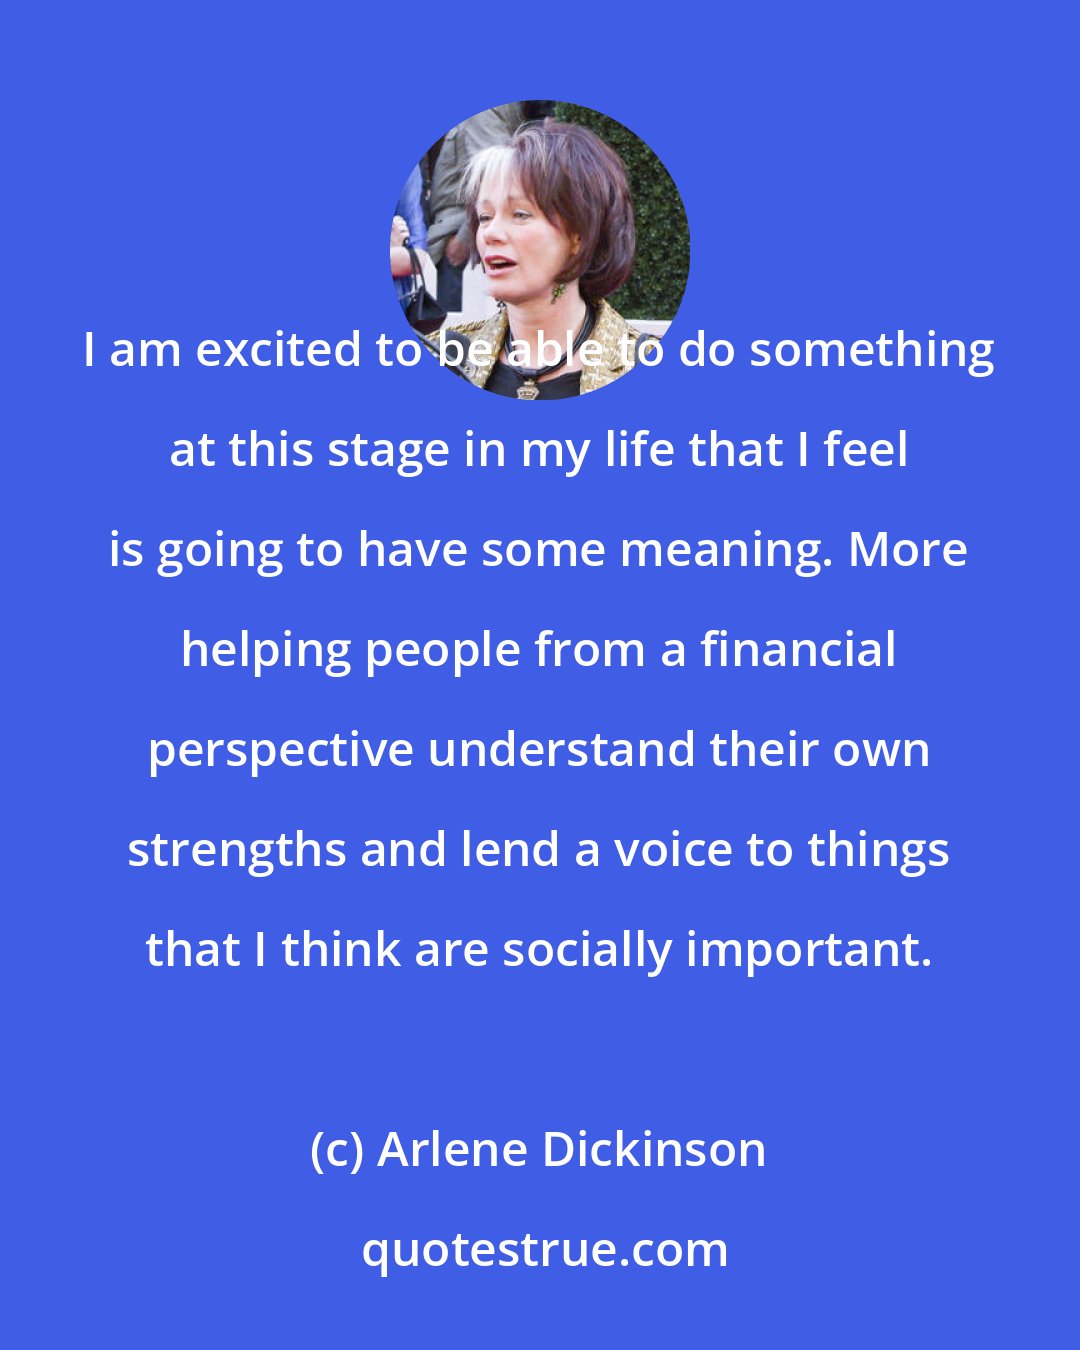 Arlene Dickinson: I am excited to be able to do something at this stage in my life that I feel is going to have some meaning. More helping people from a financial perspective understand their own strengths and lend a voice to things that I think are socially important.